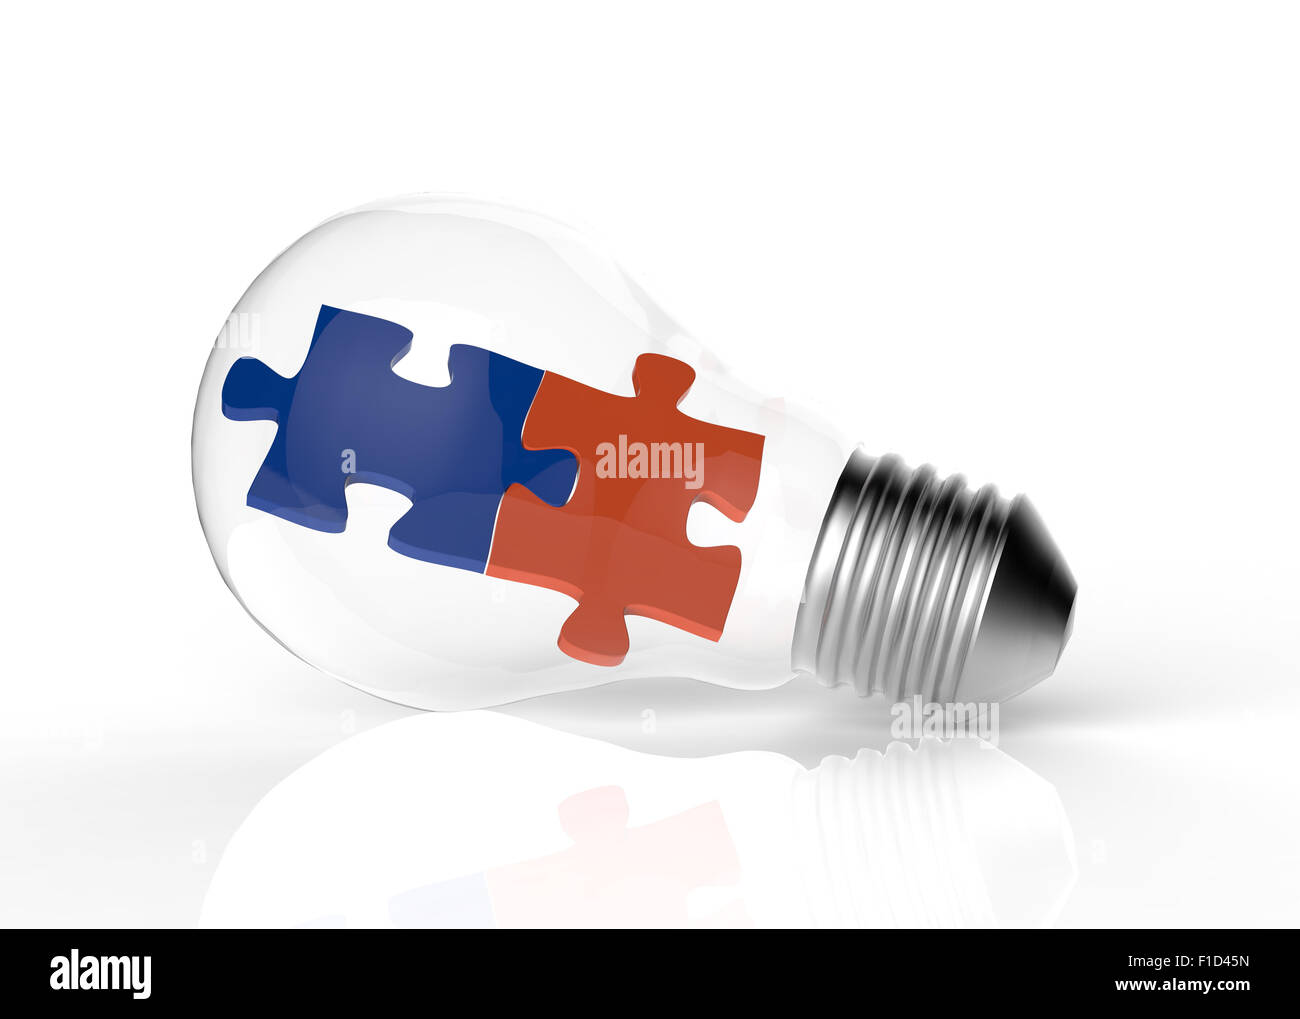 Light bulb and two puzzles as concept Stock Photo